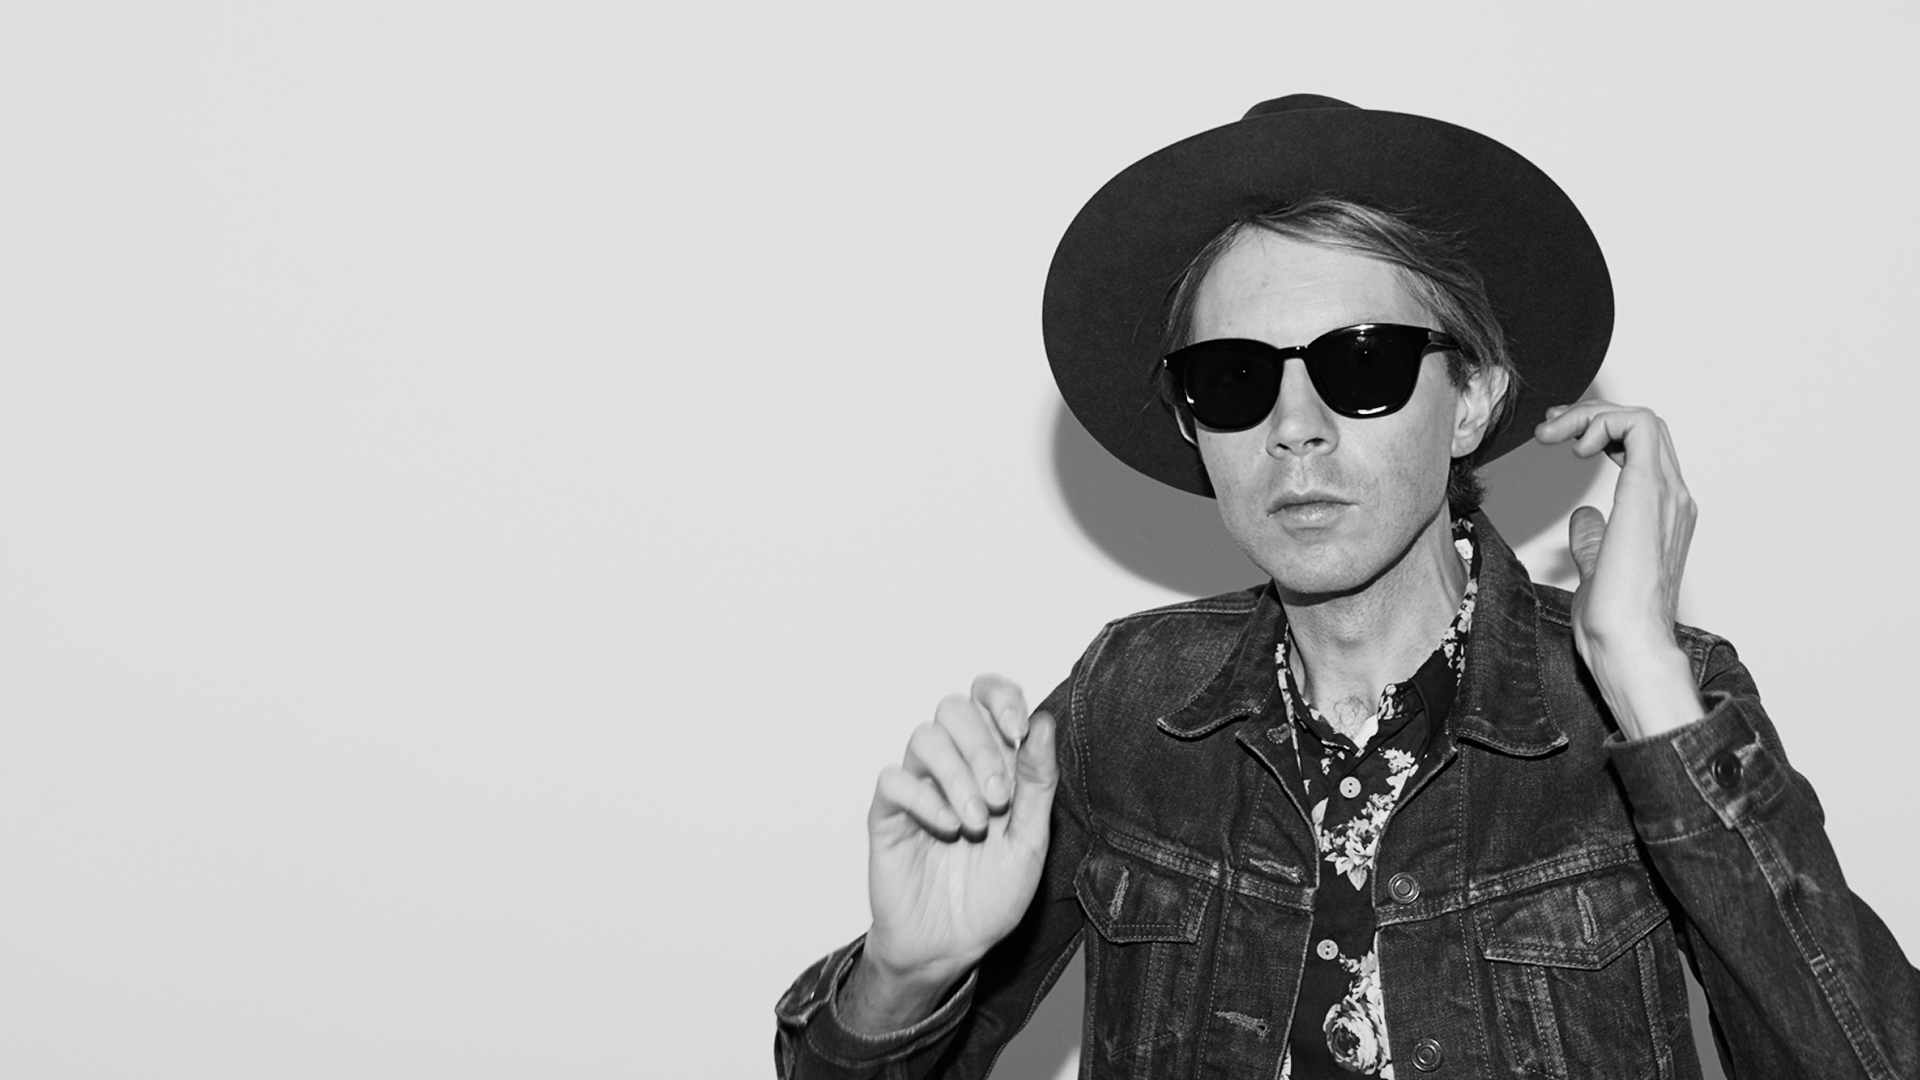 NEWS: Three Beck albums are being reissued on vinyl